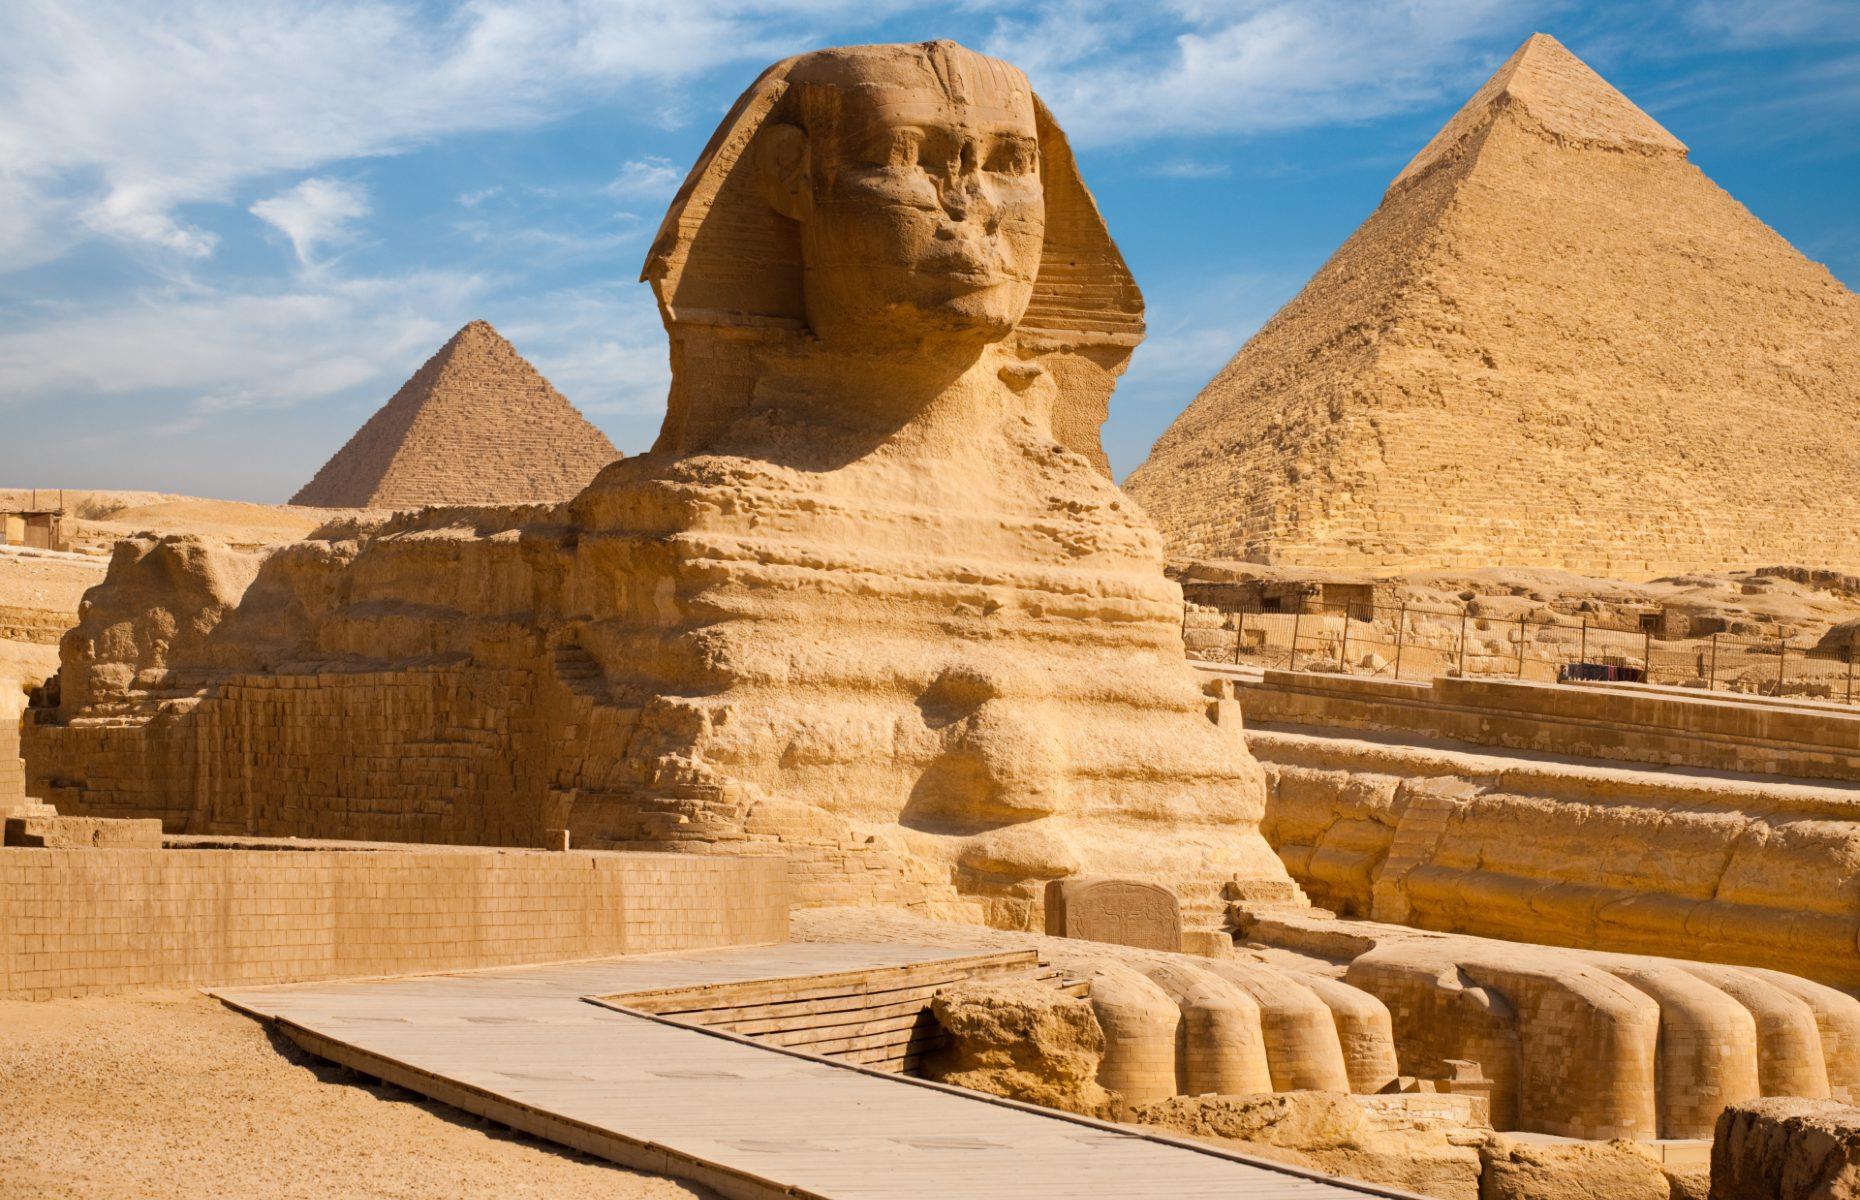 The giant statue, located in the Giza Plateau near the Great Pyramid, was modeled on the mythological creature of a sphinx – a human head on a lion’s body. It wasn’t until the early 19th century that the body was revealed, though, when a Genoese explorer and a team of around 160 men attempted to dig it out. Although their attempts failed, the sphinx was completely excavated by the late 1930s. If you look closely, you’ll see that in the previous photograph, its feet are not visible.